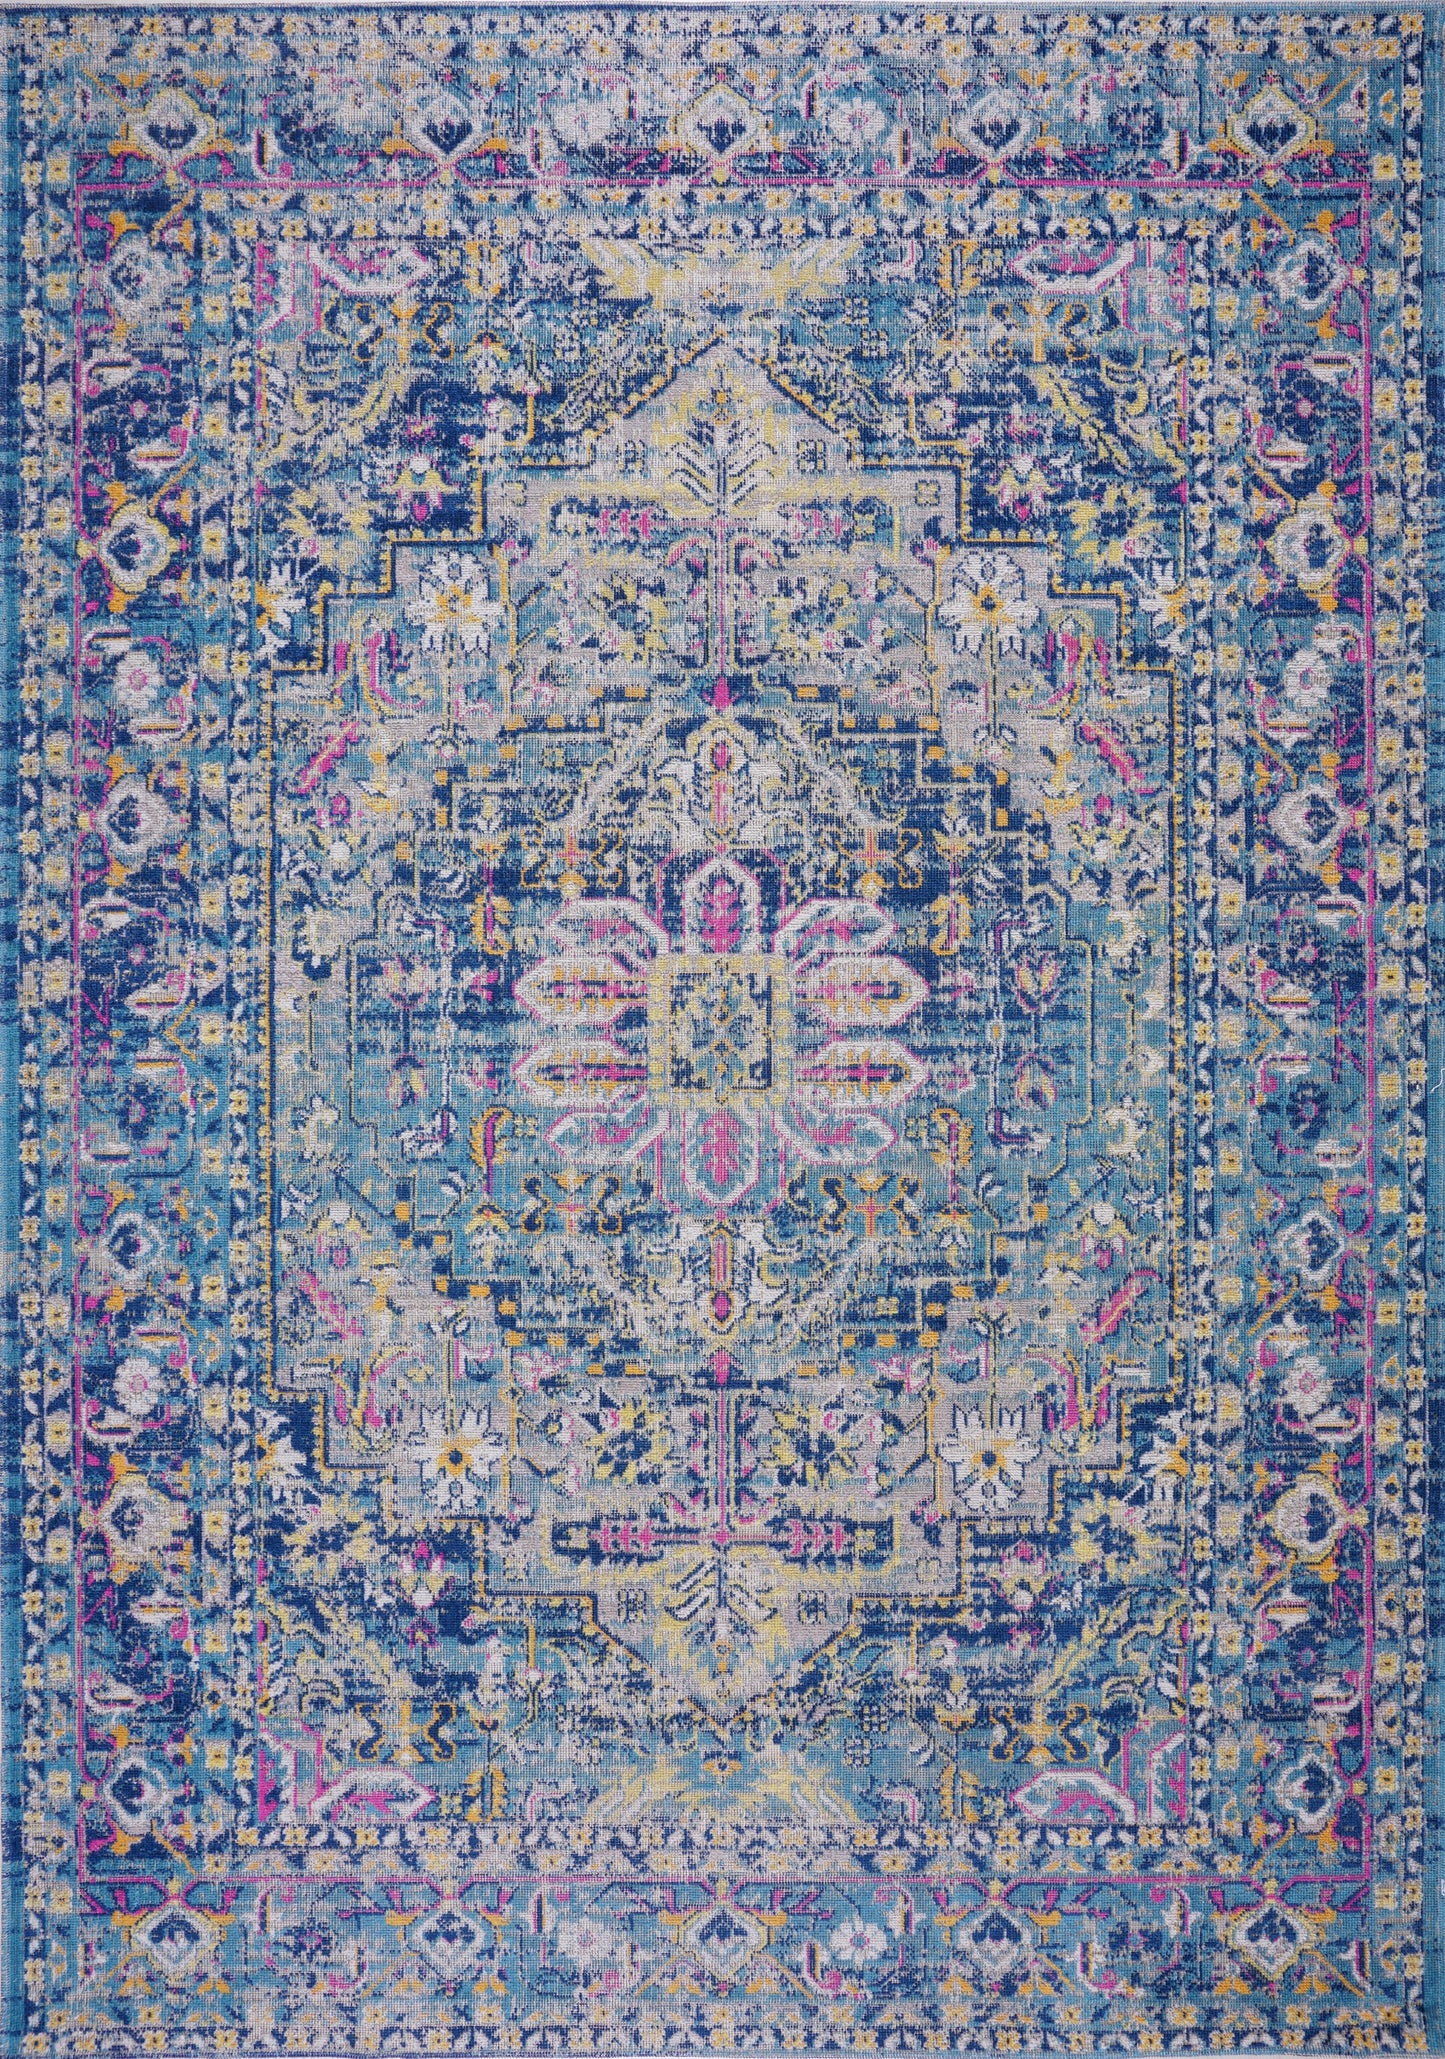 ladole rugs timeless collection rowen beautiful blue traditional outdoor runner 3x5 27 x 411 80cm x 150cm 2x5, 3x5 Runner Rug, Entry Way, Entrance, Balcony, Bedside, Home Office, Table Top